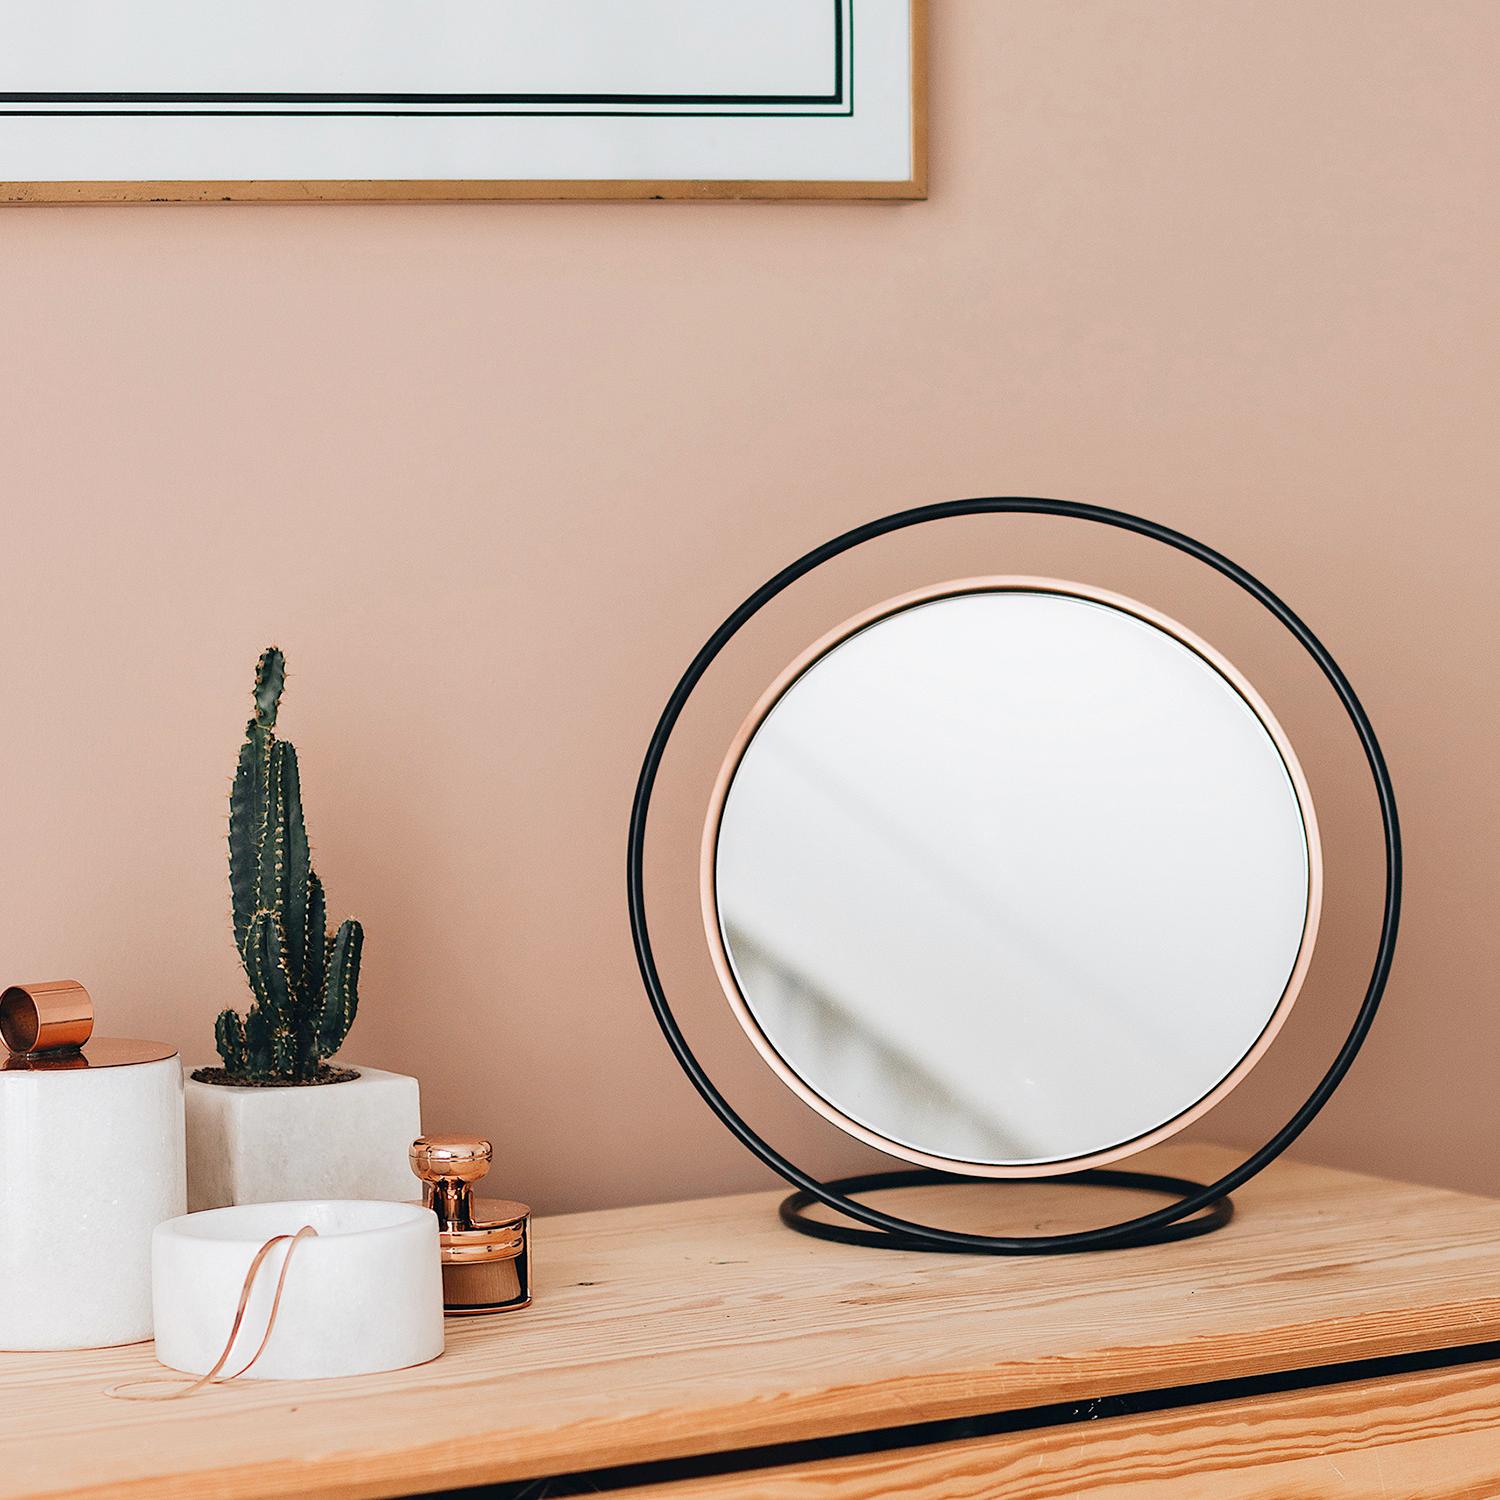 Hollow, creates a beautiful illusion through geometry and design. Metal circular frame acts as a stand for the mirror by creating a deception as if its floating in the air. Hollow acts as a functional object as well as an attractive decorative